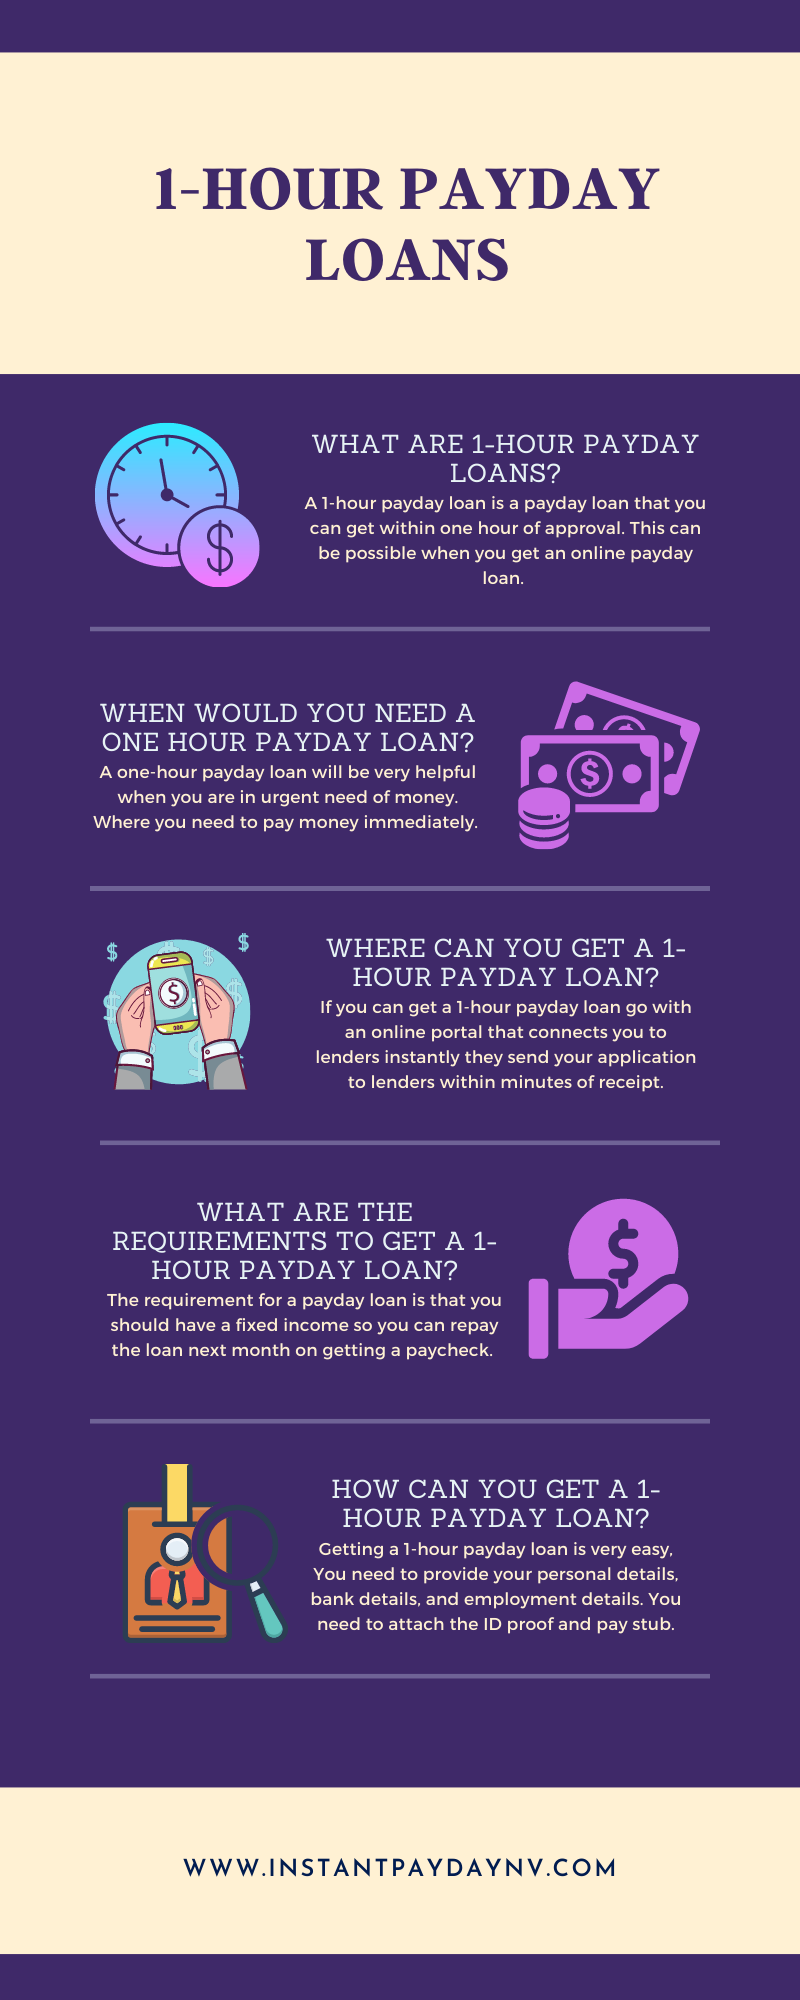 1-hour payday loans